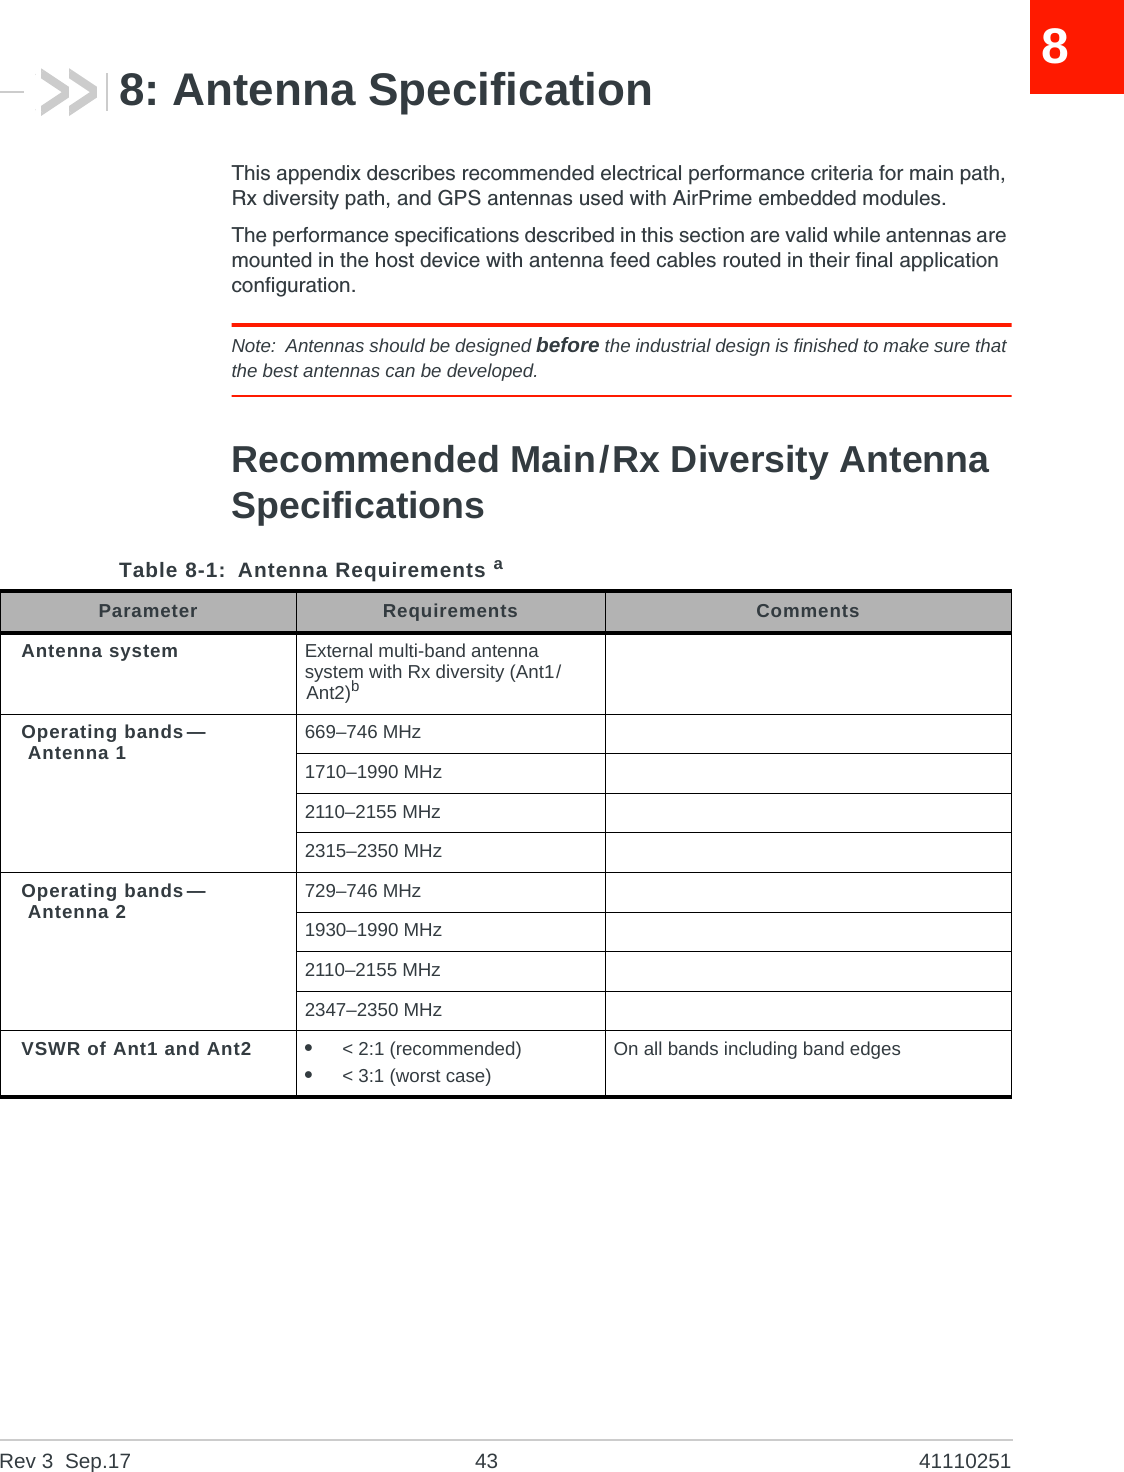 Rev 3  Sep.17 43 4111025188: Antenna SpecificationThis appendix describes recommended electrical performance criteria for main path, Rx diversity path, and GPS antennas used with AirPrime embedded modules.The performance specifications described in this section are valid while antennas are mounted in the host device with antenna feed cables routed in their final application configuration.Note: Antennas should be designed before the industrial design is finished to make sure that the best antennas can be developed.Recommended Main/Rx Diversity Antenna SpecificationsTable 8-1: Antenna Requirements a Parameter Requirements CommentsAntenna system External multi-band antenna system with Rx diversity (Ant1/Ant2)b Operating bands—Antenna 1 669–746 MHz1710–1990 MHz2110–2155 MHz2315–2350 MHzOperating bands—Antenna 2 729–746 MHz1930–1990 MHz2110–2155 MHz2347–2350 MHzVSWR of Ant1 and Ant2 •&lt; 2:1 (recommended)•&lt; 3:1 (worst case)On all bands including band edges